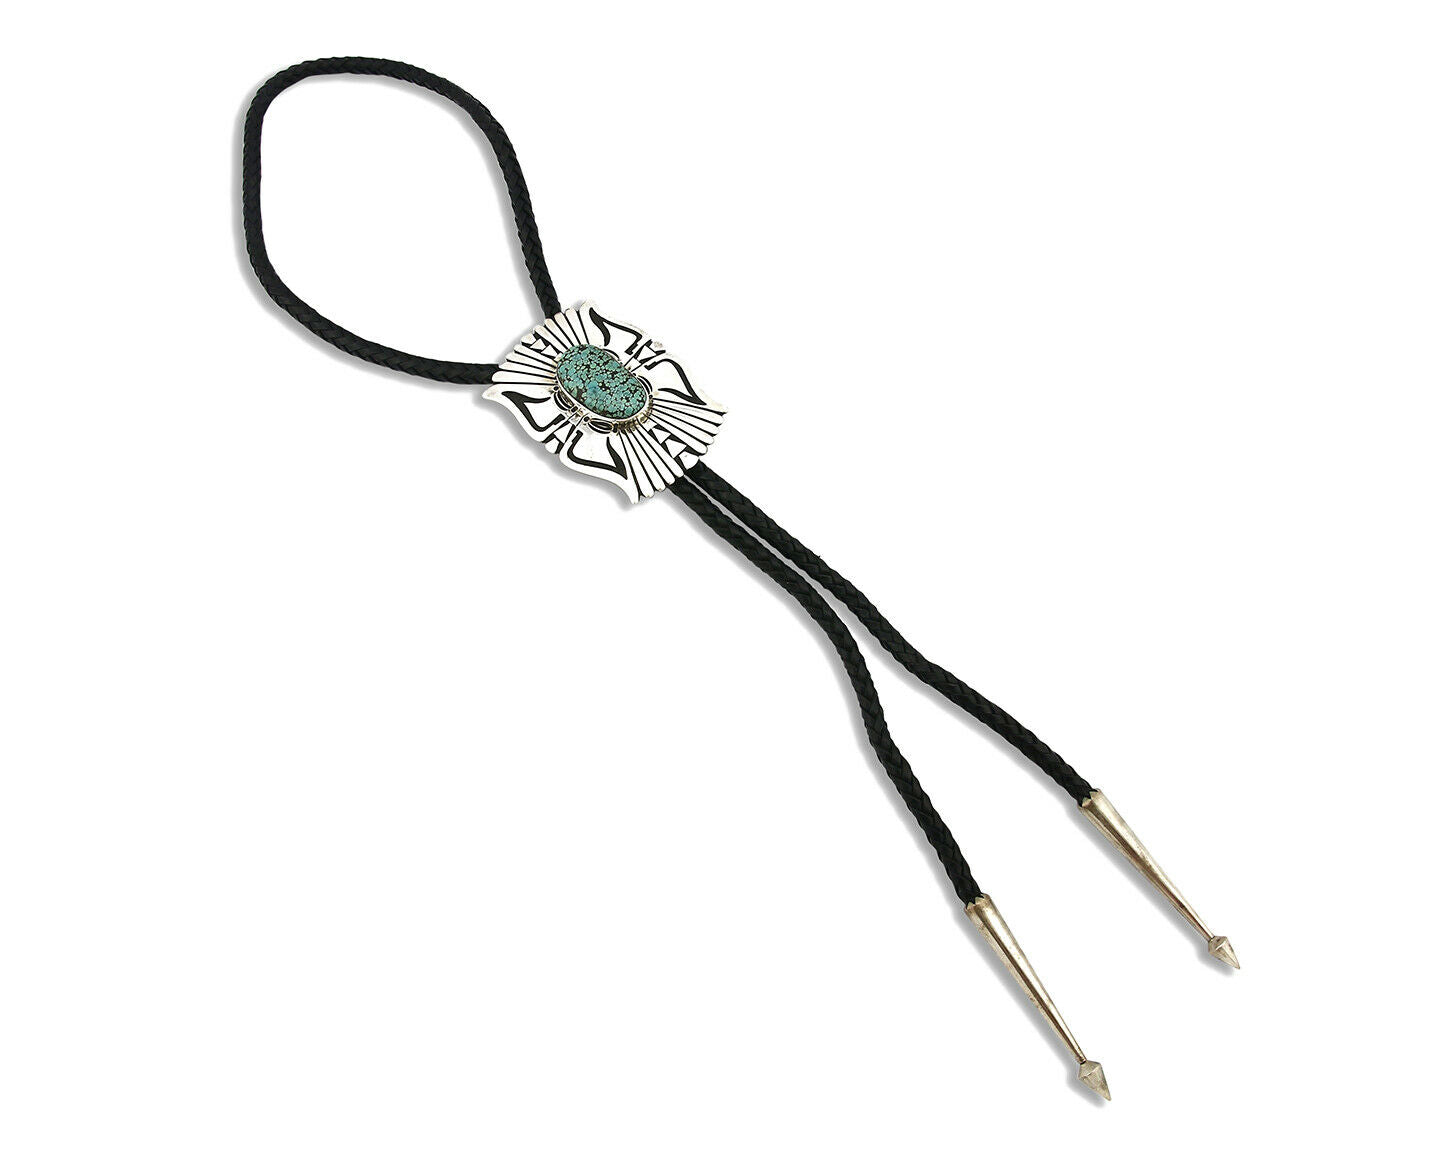 Navajo Turquoise Bolo Tie .925 Silver Spiderweb Turquoise Artist Signed J Billie